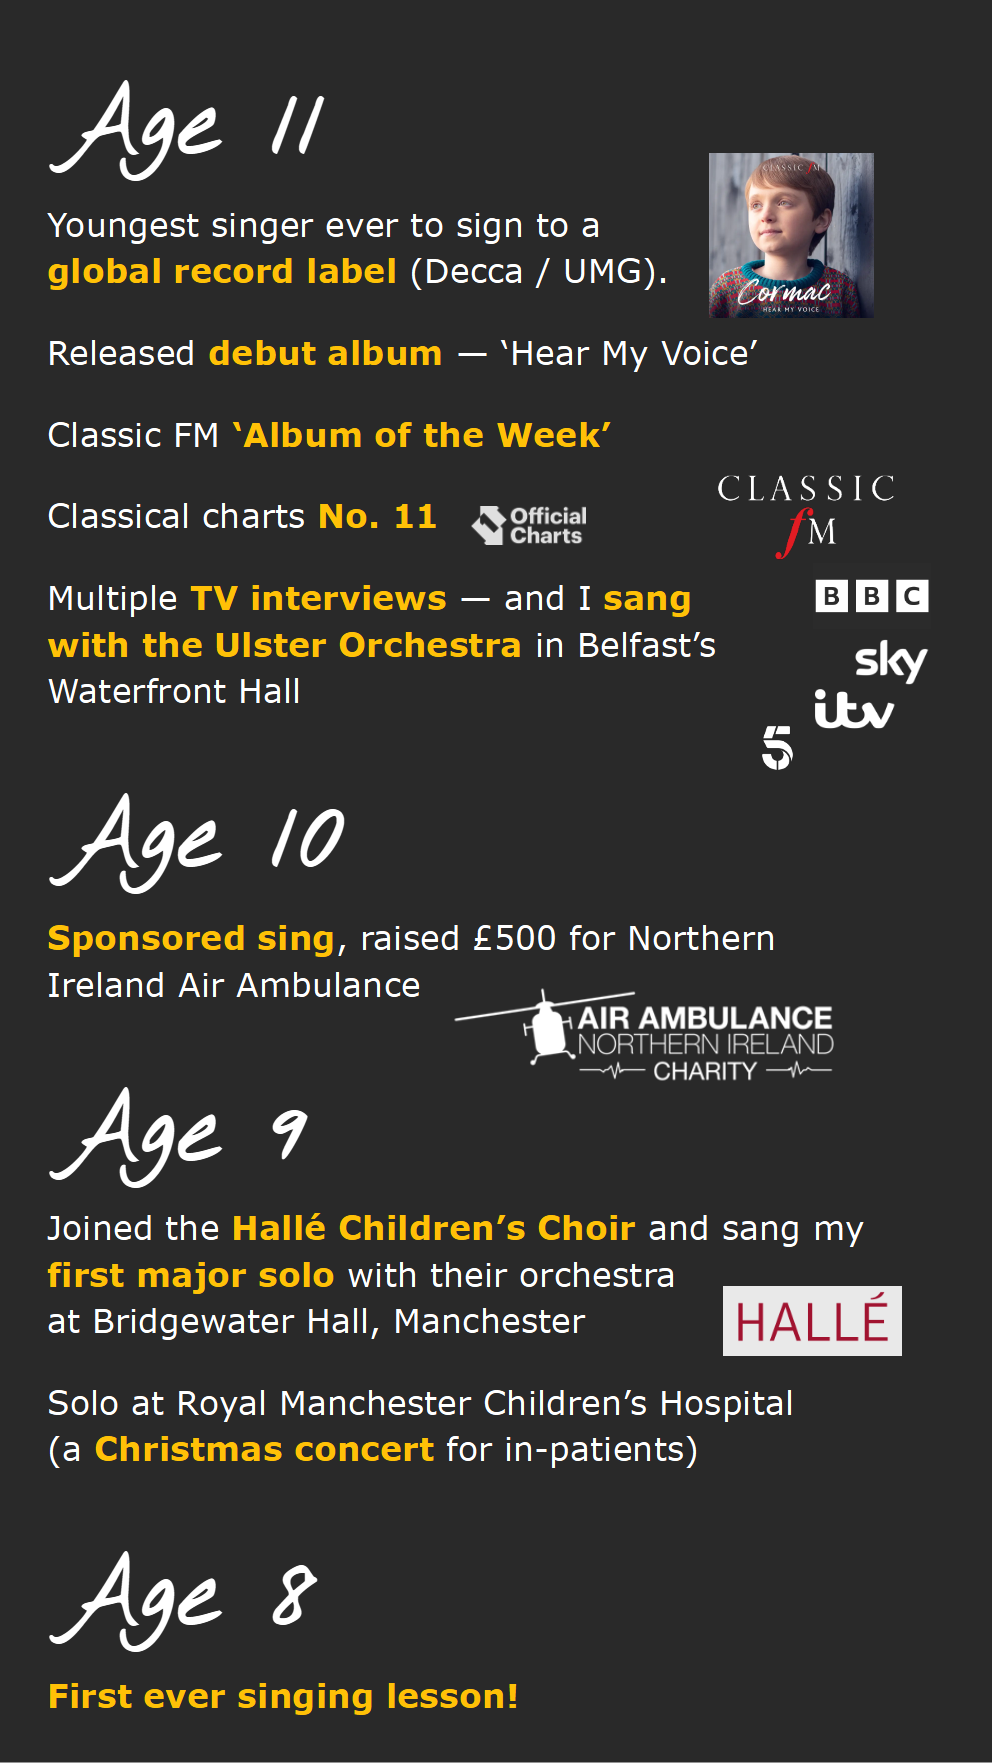 AGE 11: Youngest singer ever to sign to a global record label (Decca/UMG). Released debut album – ‘Hear My Voice’.  Classic FM ‘Album of the Week’. Classical charts no. 11.   Multiple TV interviews, on BBC, Sky, ITV and Channel 5—and I sang with the Ulster Orchestra in Belfast’s Waterfront Hall. AGE 10: Sponsored sing, raised £500 for Northern Ireland Air Ambulance. AGE 9: Joined the Hallé Children’s Choir and sang my first major solo with their orchestra at Bridgewater Hall, Manchester. Solo at Royal Manchester Children’s Hospital (a Christmas concert for in-patients). AGE 8: First ever singing lesson.